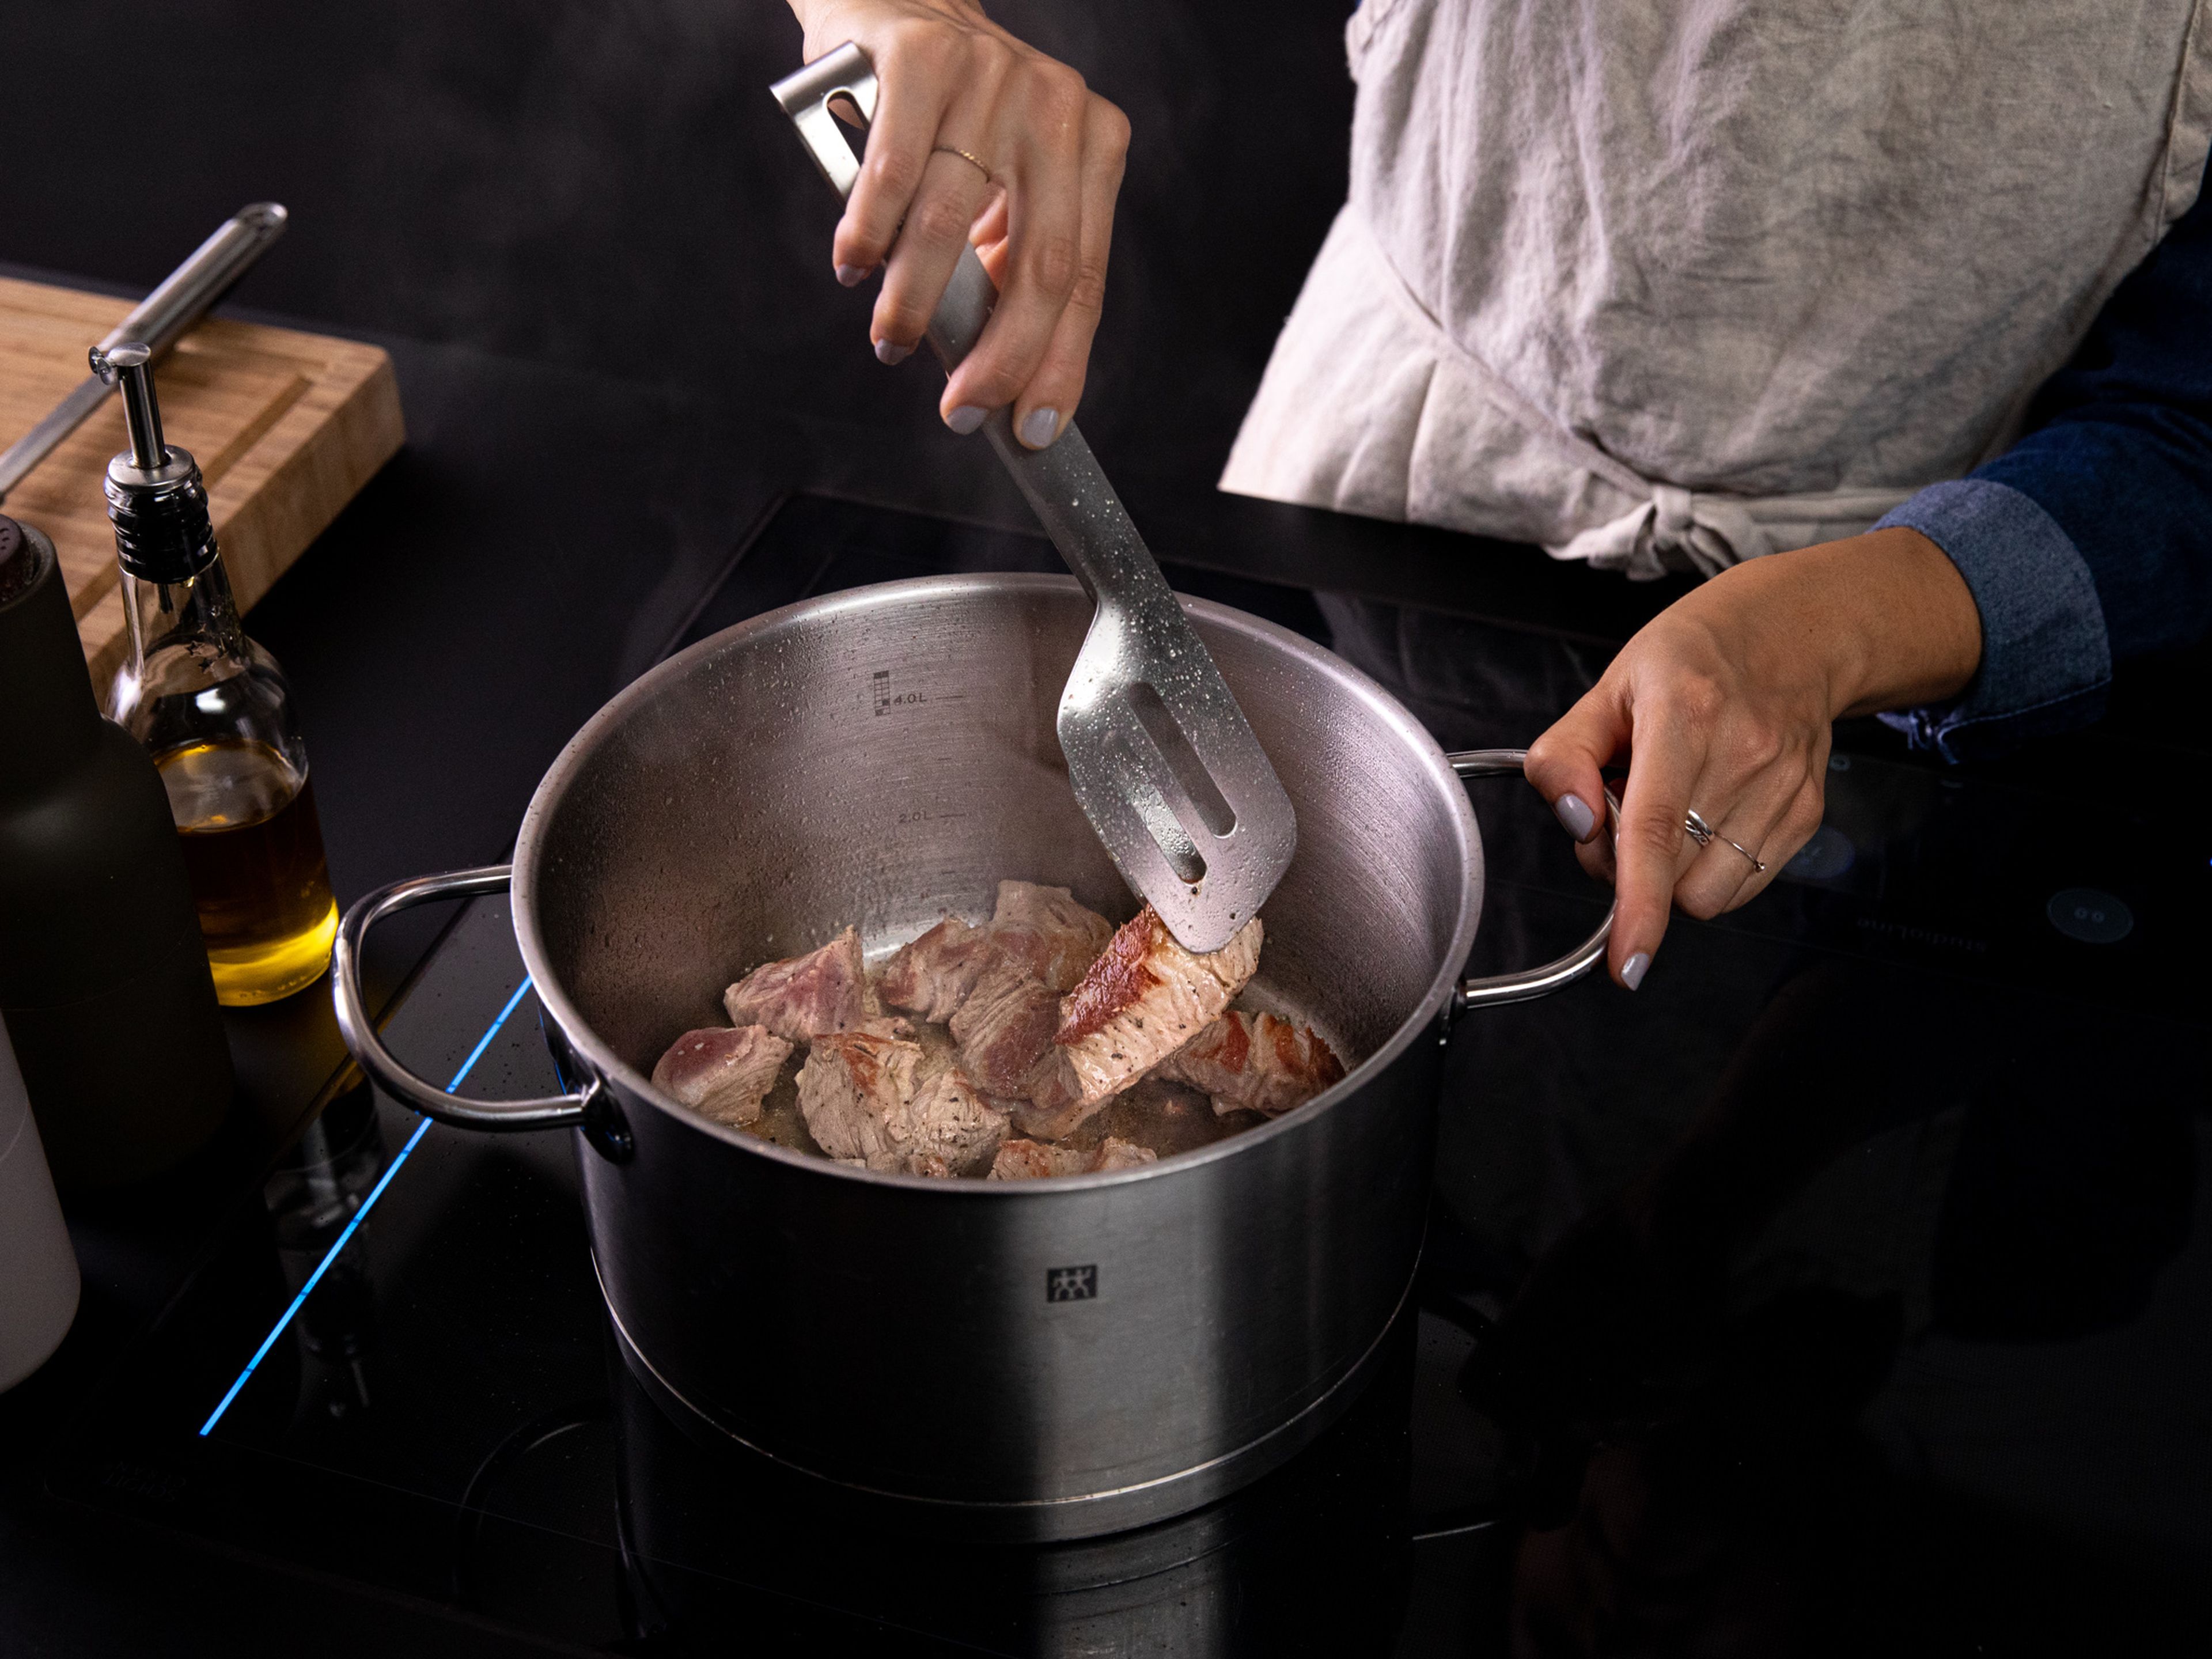 Add some vegetable oil to a large heavy-bottomed pot over medium-high heat. Add the pork, season with salt and pepper, and brown on all sides.